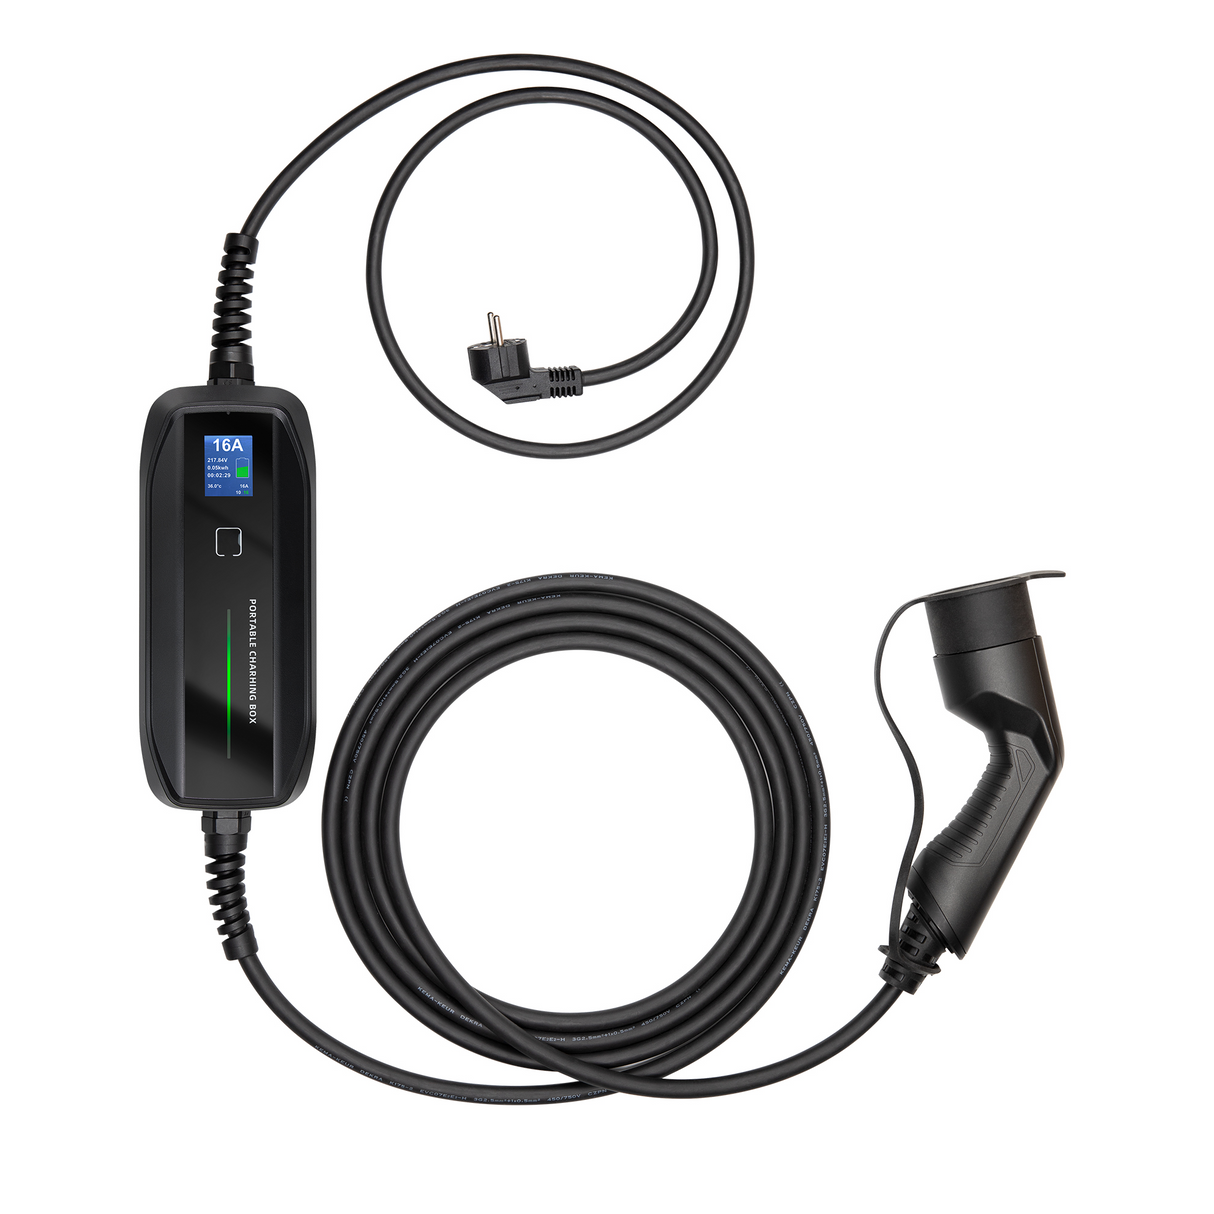 Mobile Charger VinFast VF 9 - Besen with LCD - Type 2 to Schuko